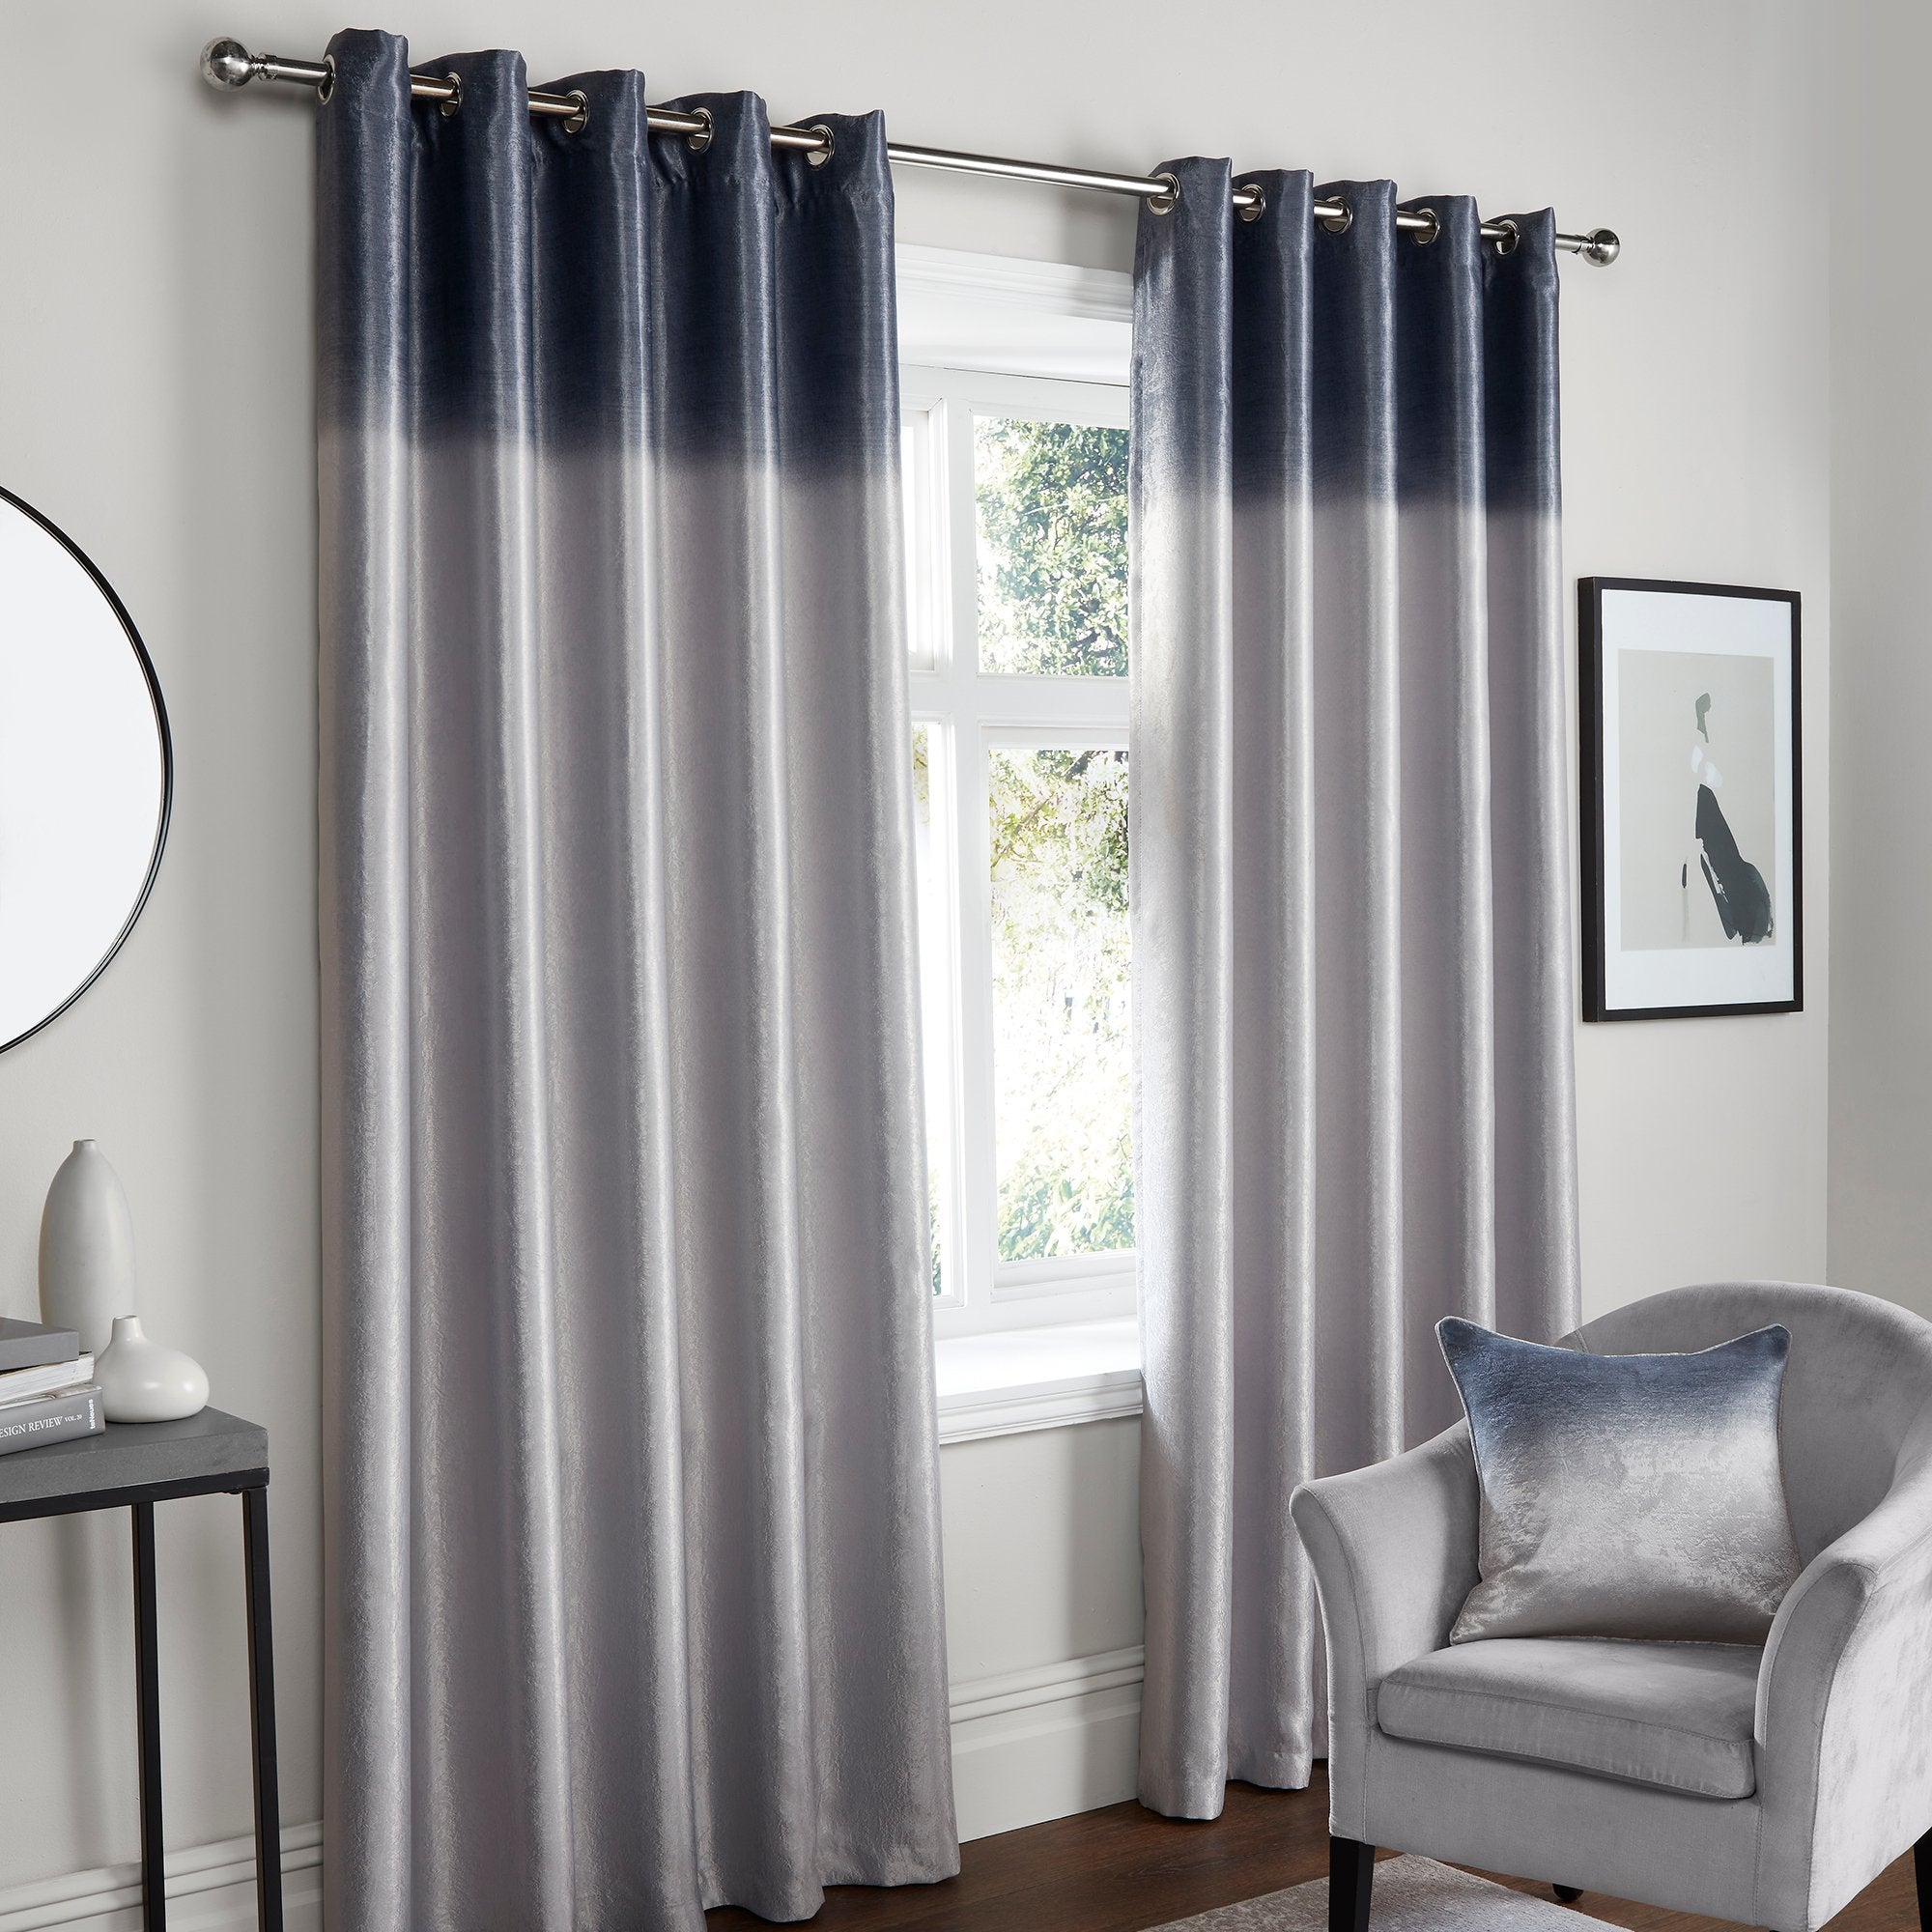 Pair of Eyelet Curtains Ombre Strata by Fusion in Grey